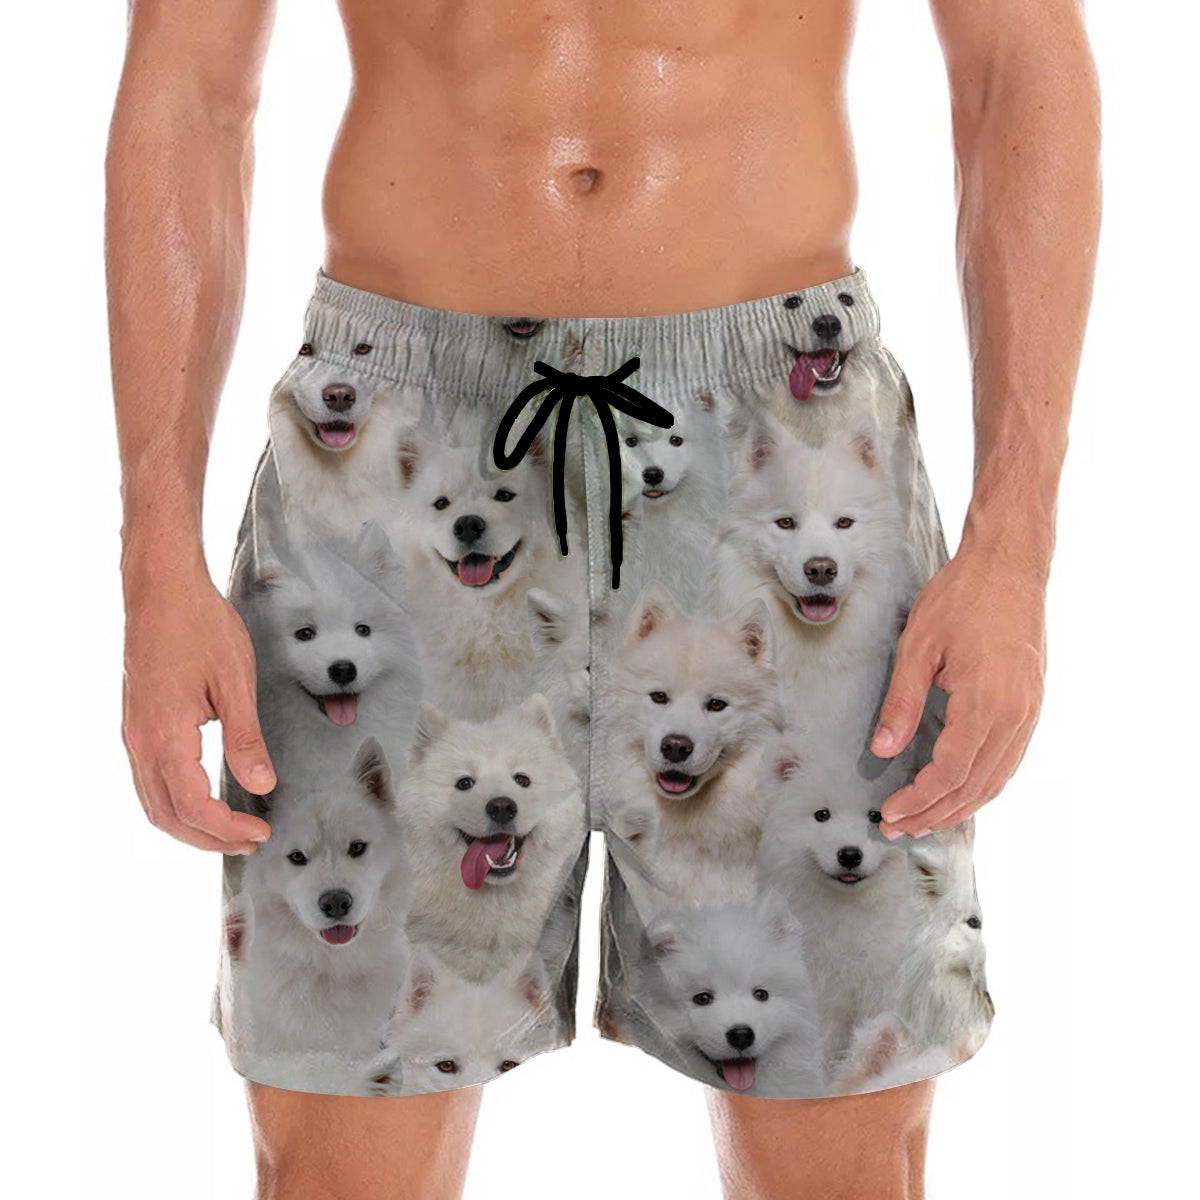 You Will Have A Bunch Of Samoyeds - Shorts V1